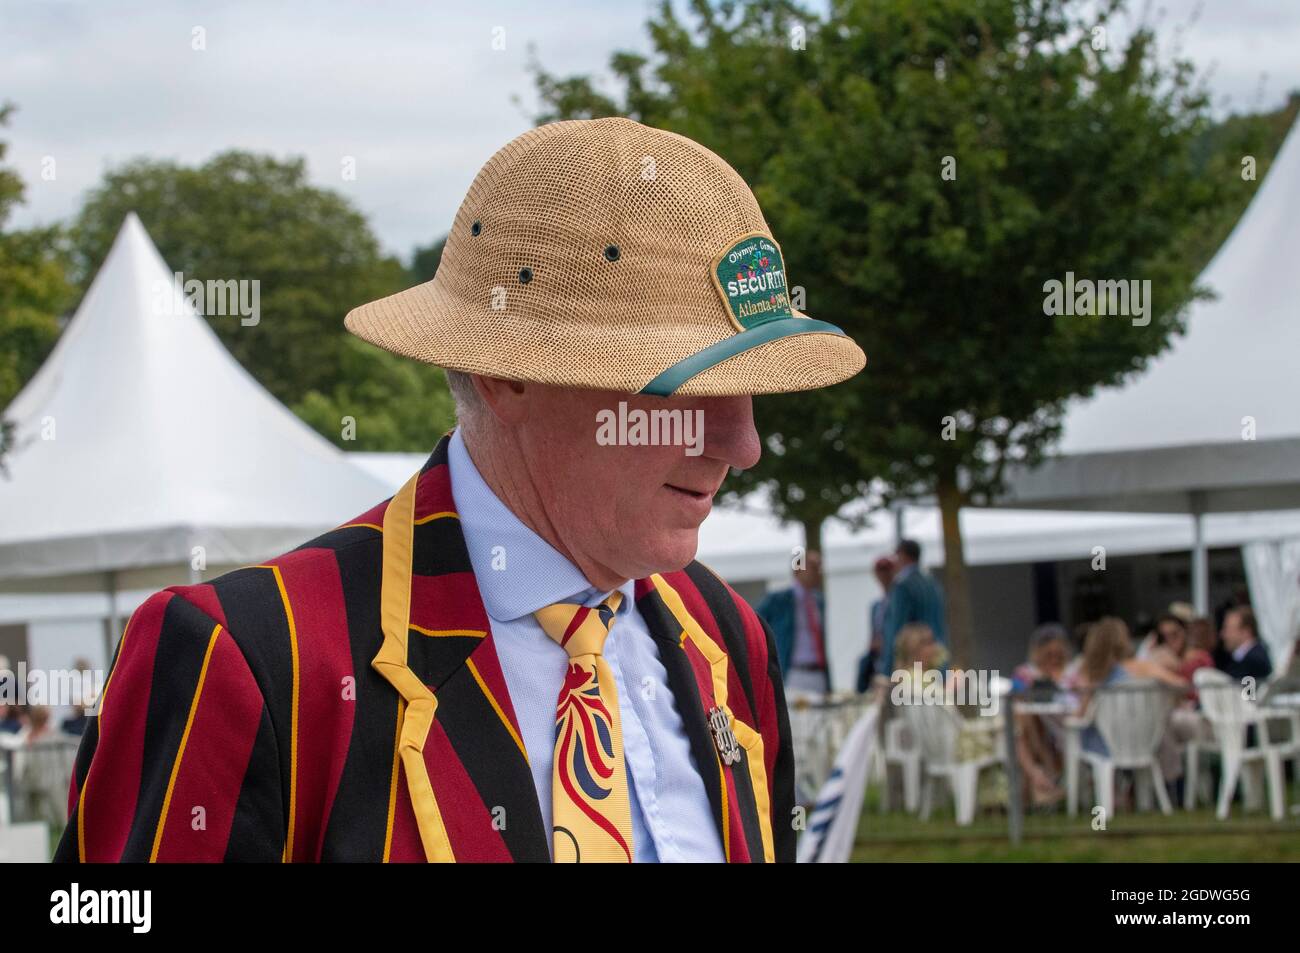 Henley Royal Regatta, 14 August 2021 HRR Umpire wearing a straw pith helmet( from a previous event -Olympic Games Atlanta 1996- Security) disembarking from the Umpires Launch as it docks after the race Credit: Gary Blake/Alamy Live News Stock Photo